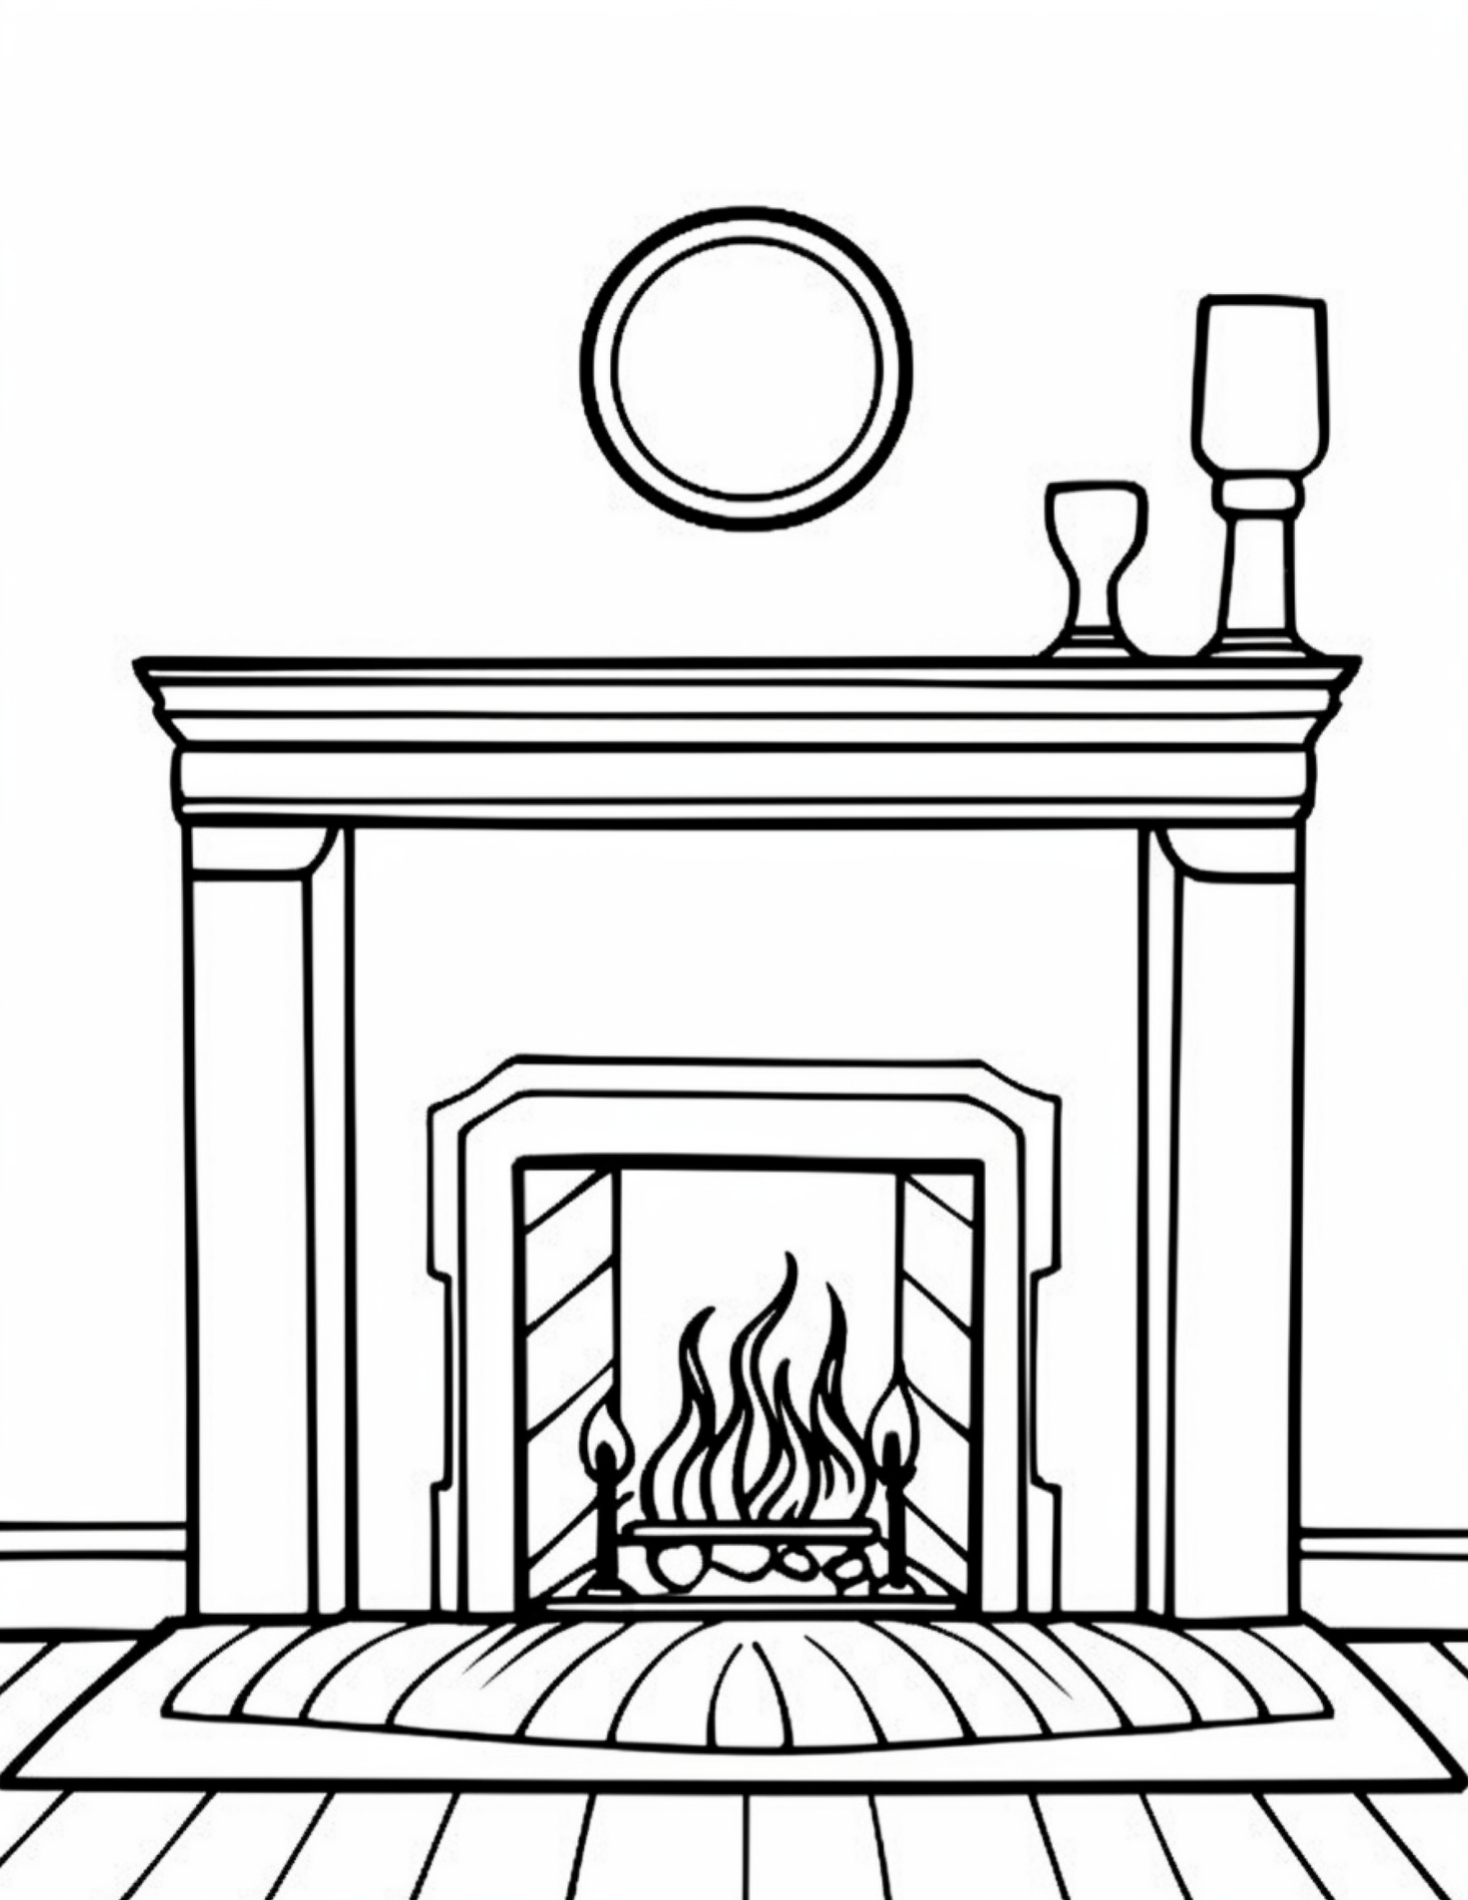 Fireplace coloring pages